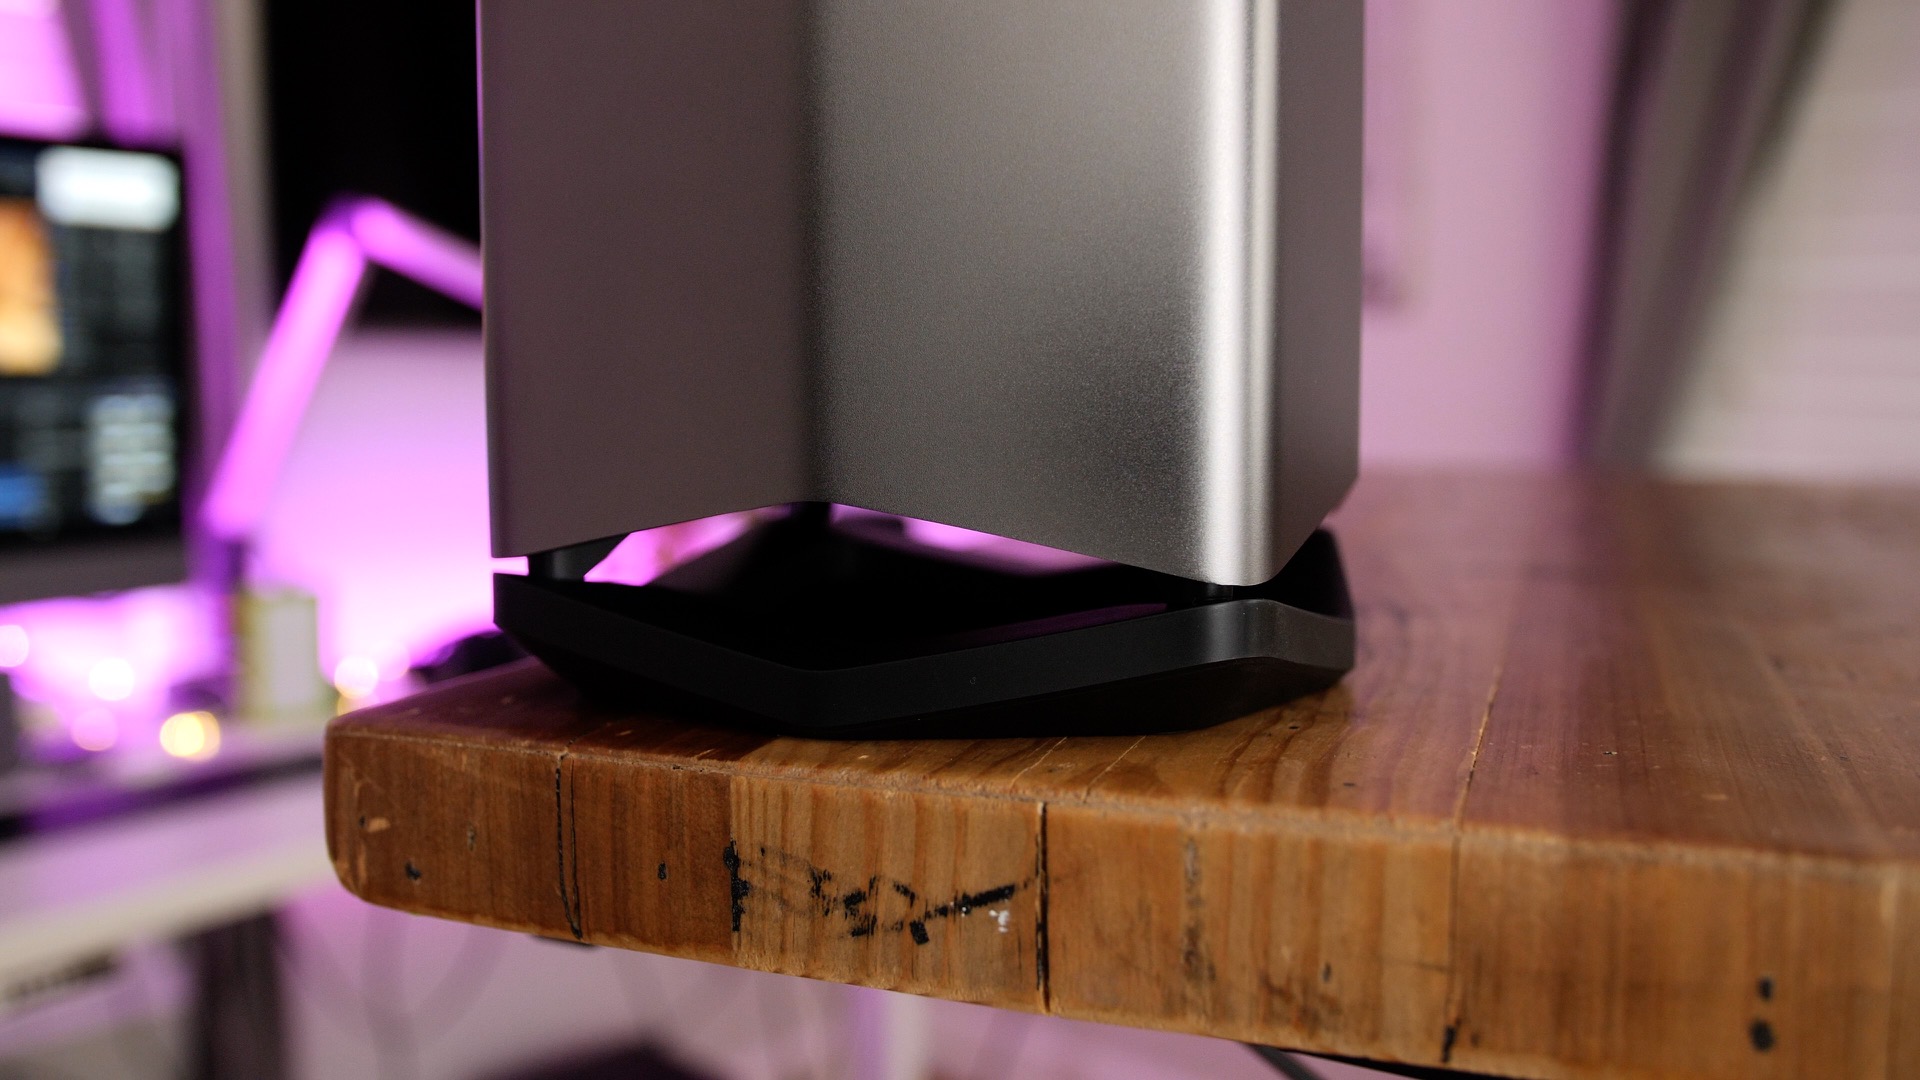 Review: Blackmagic eGPU - quiet, beautiful, and limited in scope 